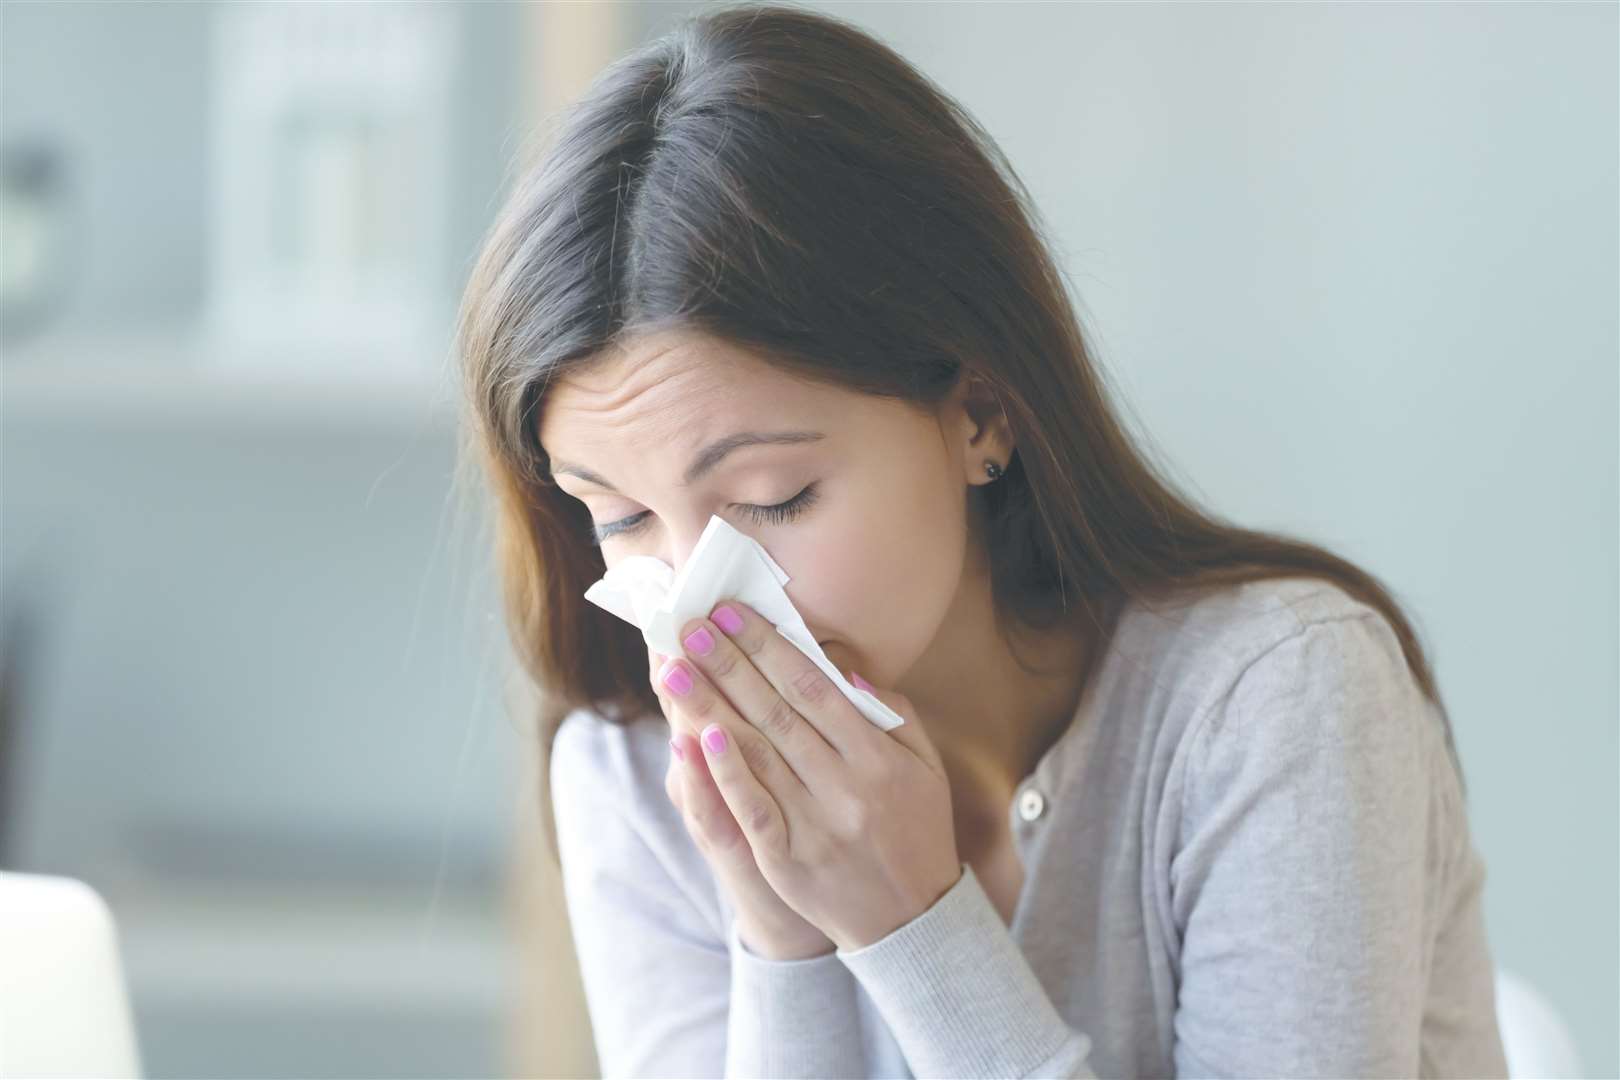 Sick young woman sitting indoors holding tissue handkerchief blowing running nose feels unwell unhealthy, girl having symptoms of chronic sinusitis disease, seasonal allergy or cold fever flu concept